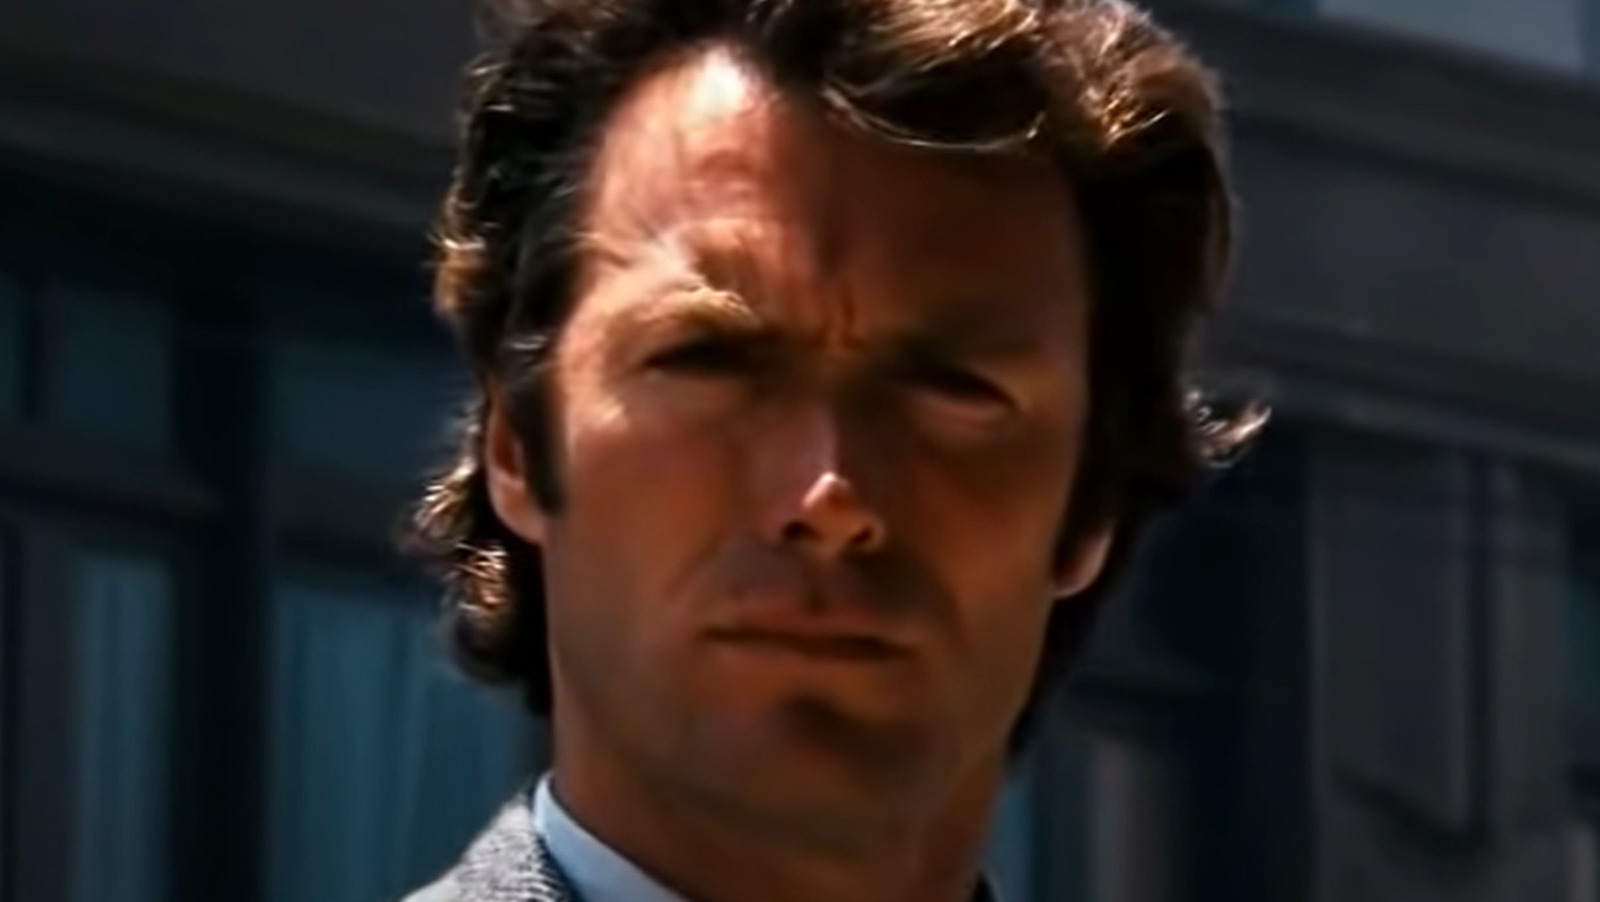 https://www.looper.com/img/gallery/the-untold-truth-of-dirty-harry/l-intro-1654196055.jpg